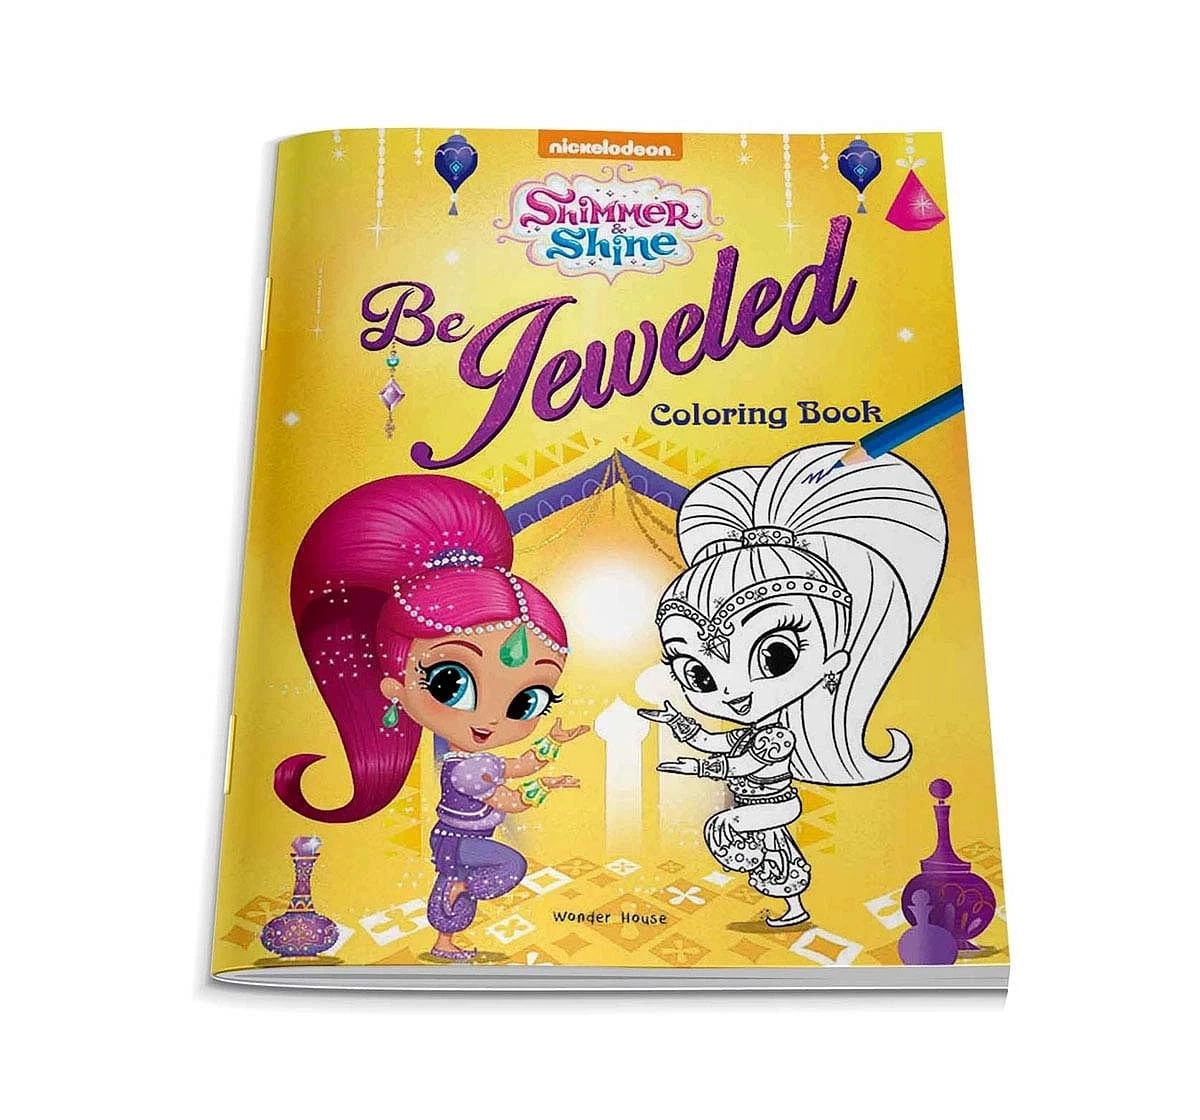 Wonder House Books Be Jeweled Coloring Book for kids 3Y+, Multicolour